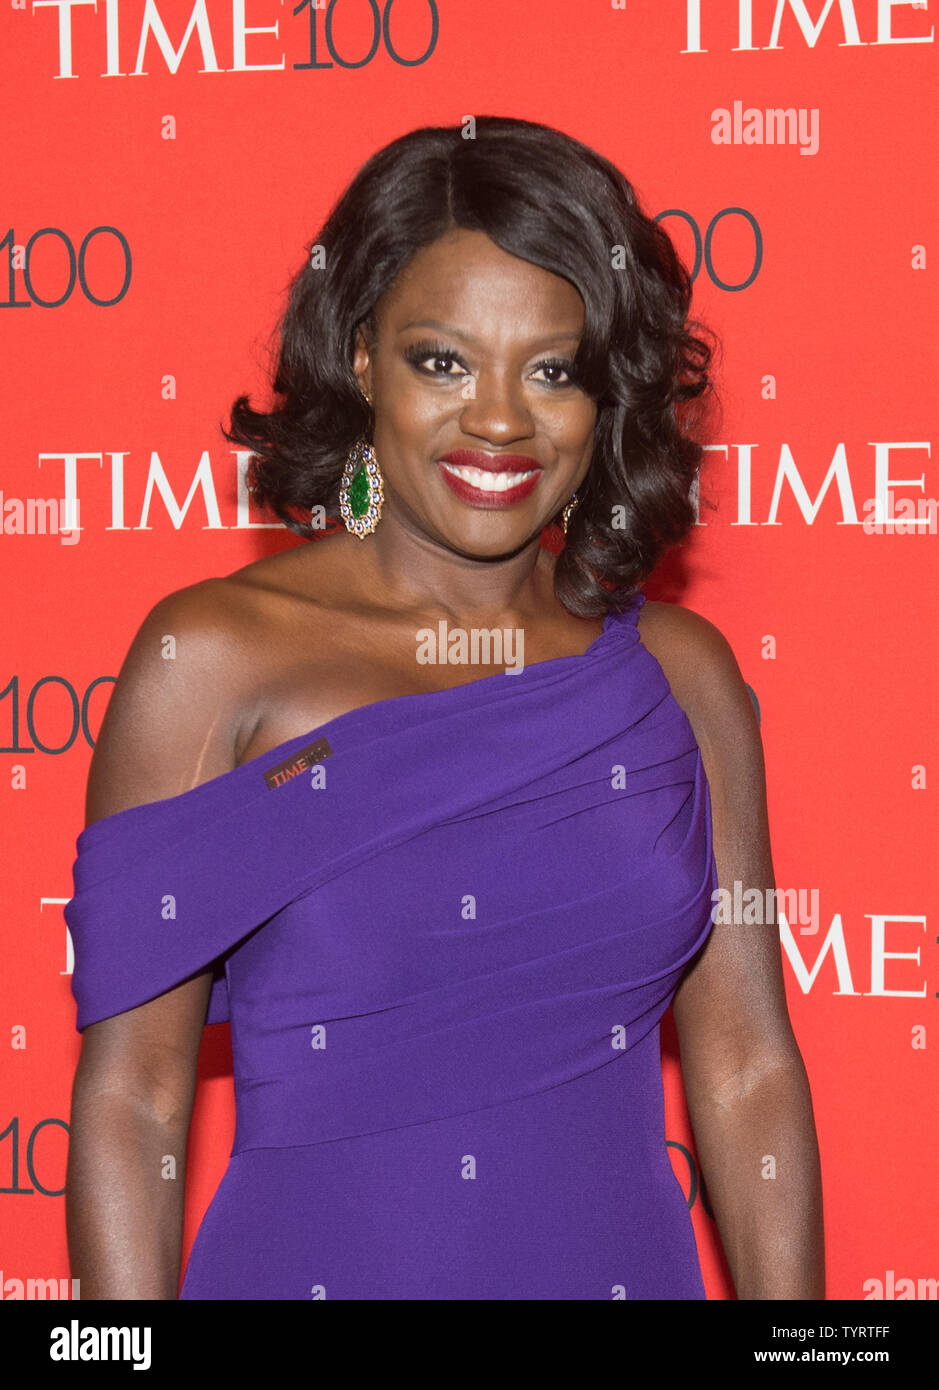 Viola Davis arrives on the red carpet at the TIME 100 Gala at Frederick P. Rose Hall, Home of Jazz at Lincoln Center, in New York City on April 26, 2017. TIME 100 celebrates TIME Magazine's list of the 100 Most Influential People in the World.      Photo by Bryan R. Smith/UPI Stock Photo